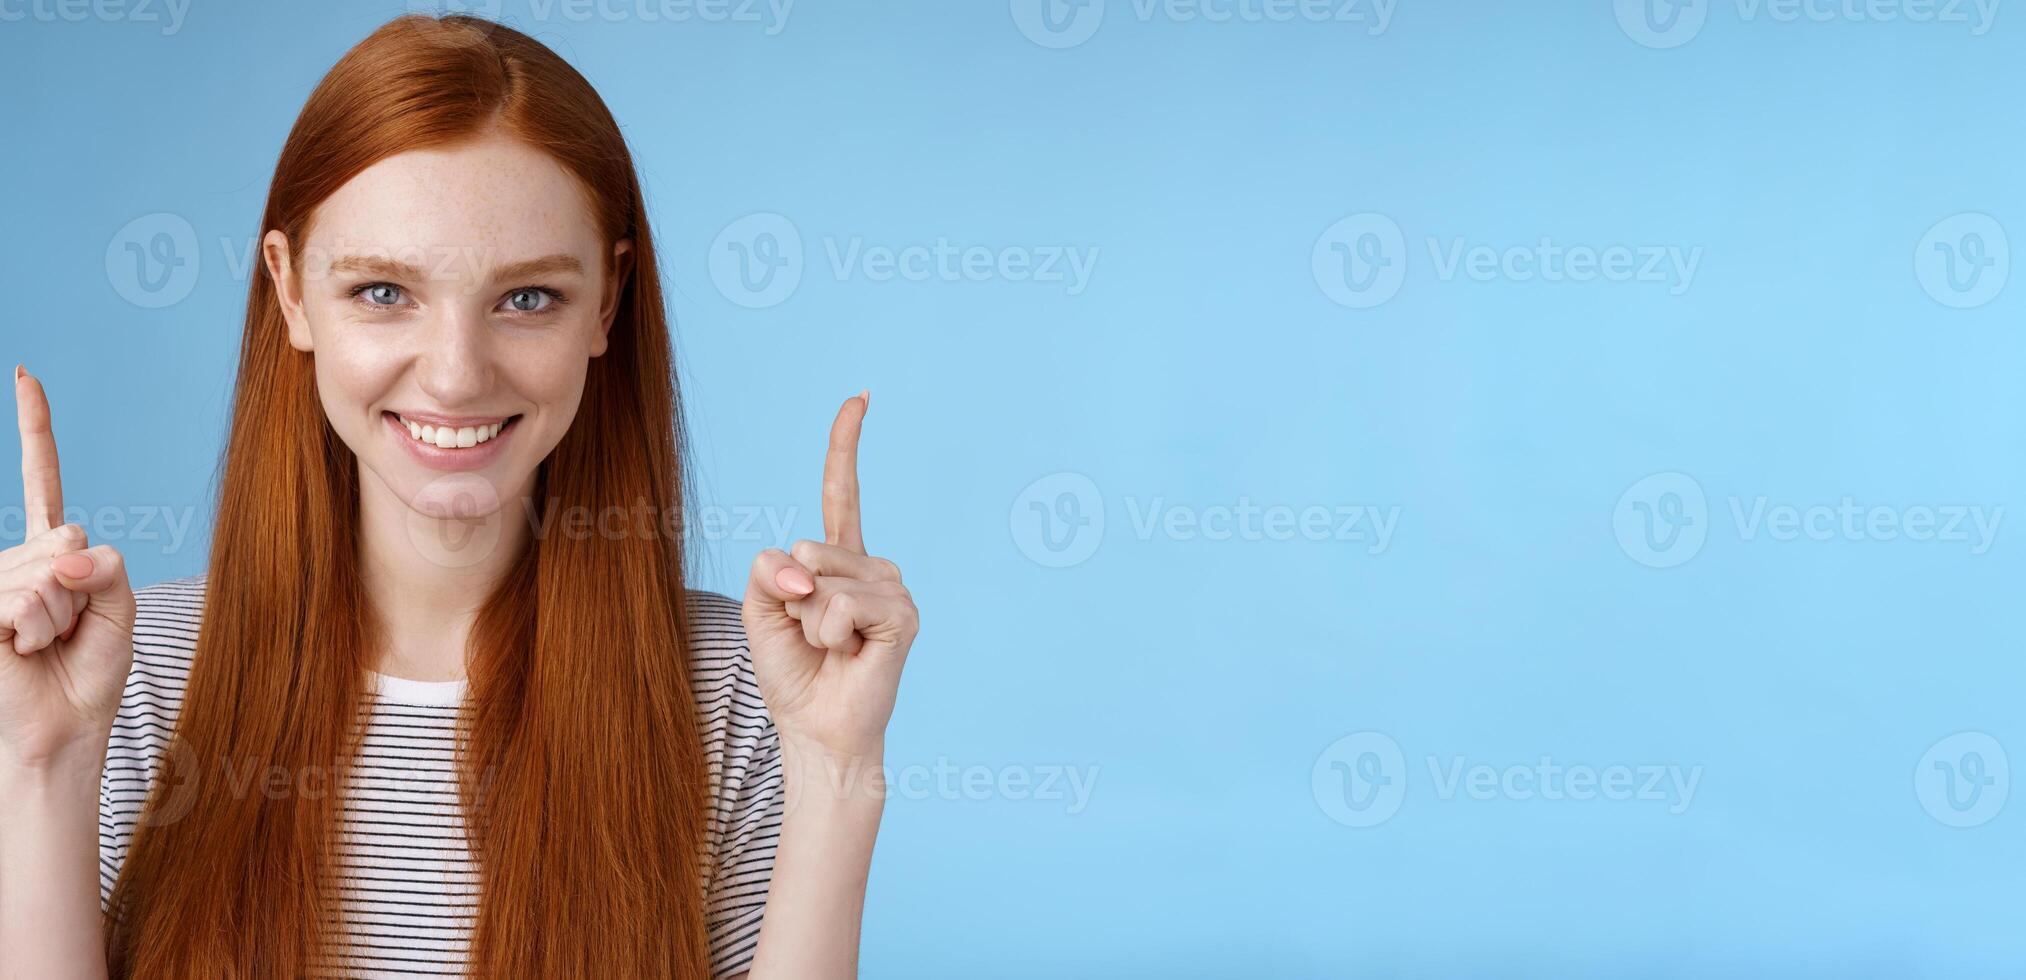 Determined good-looking redhead female student enter college final decision pointing up index fingers raised confidently smiling white teeth look camera assertive giving recommendation what choose photo